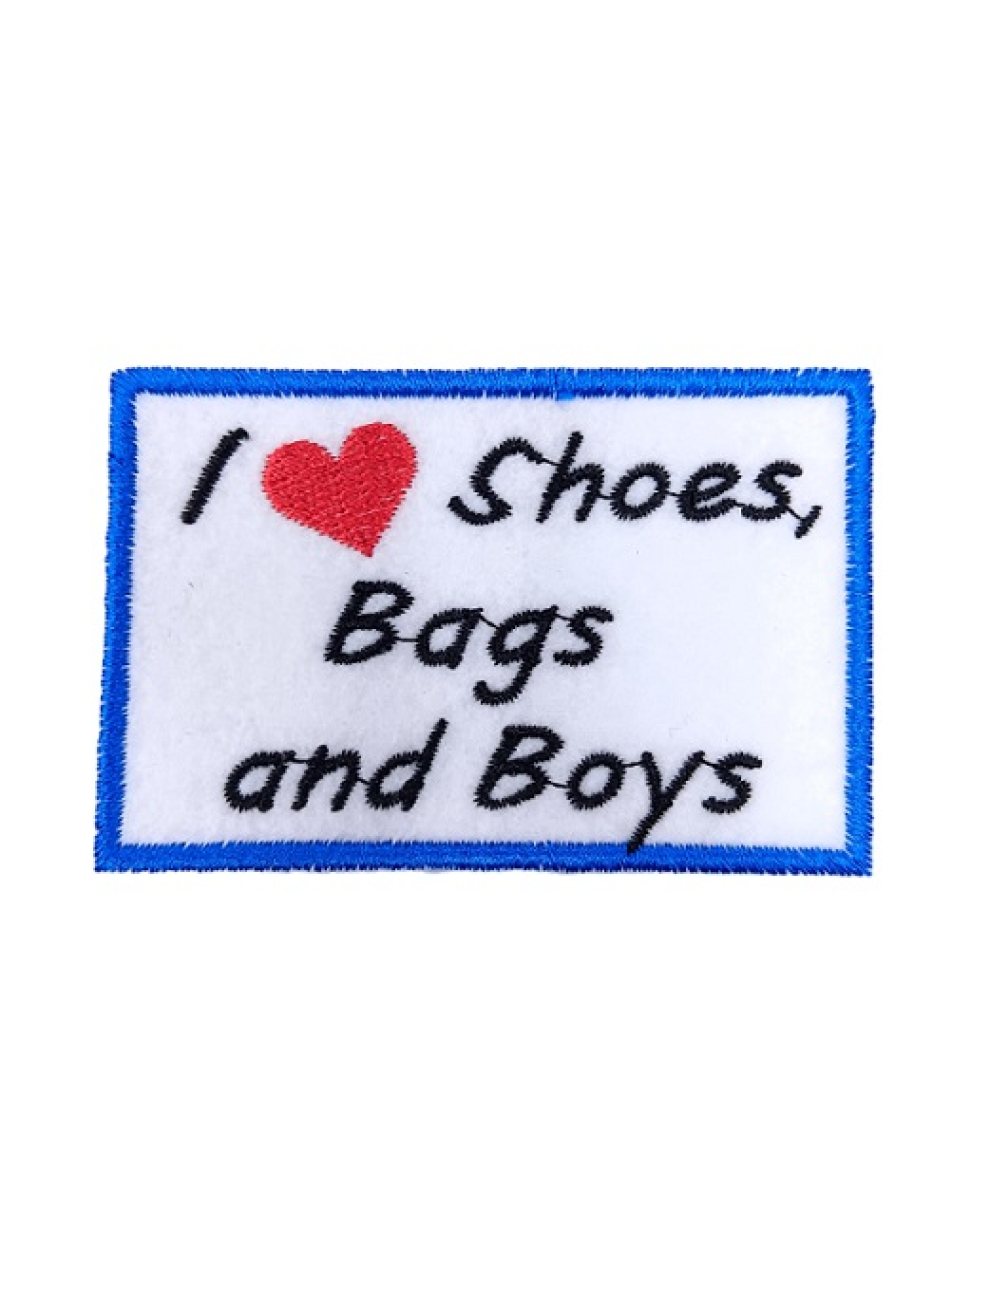 I love Shoes, Bags and Boys